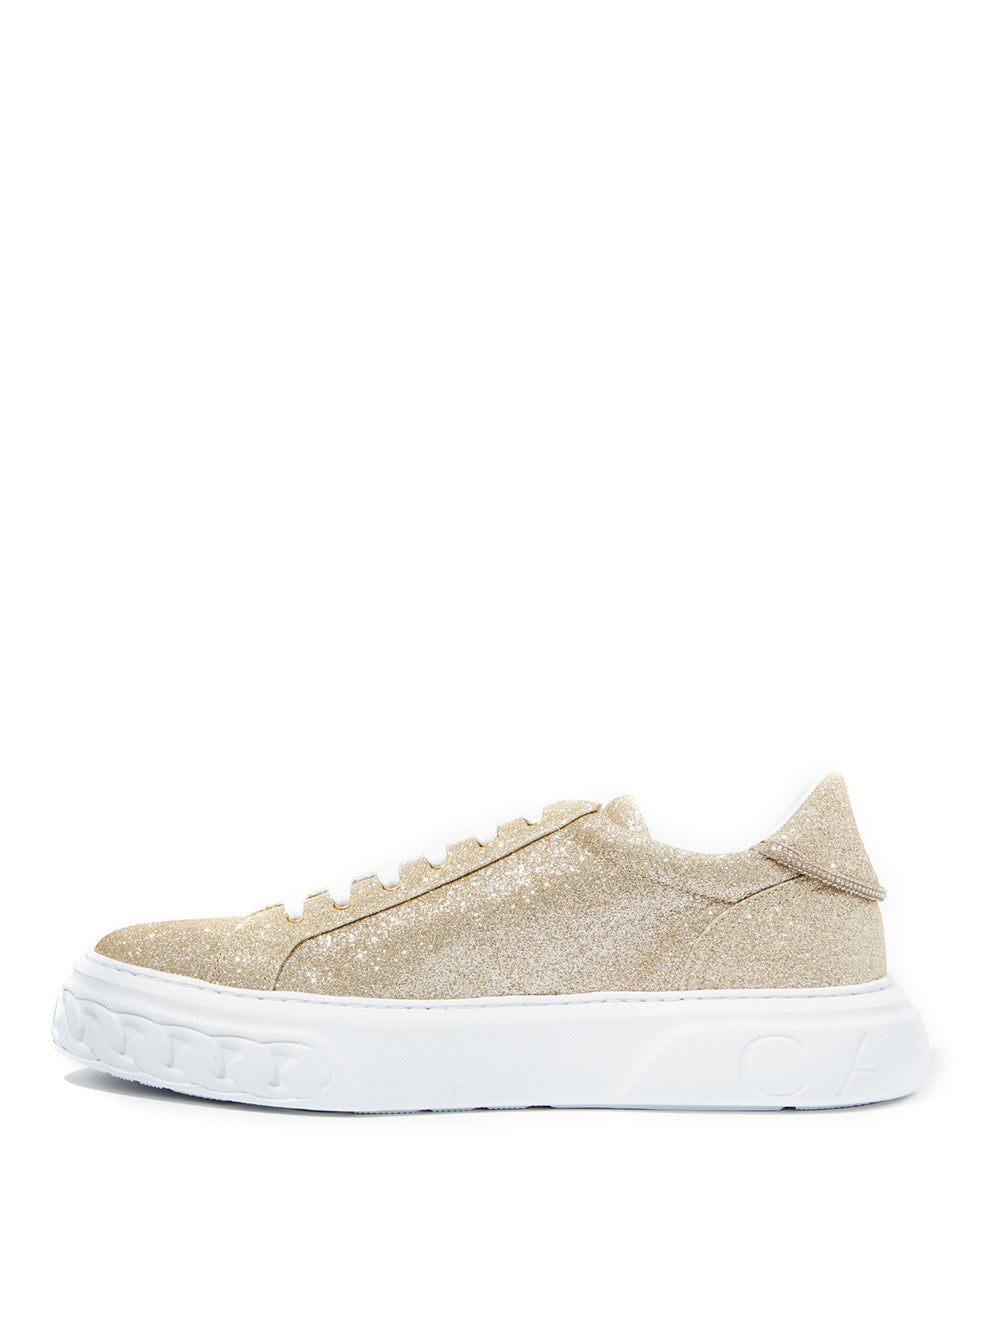 Casadei Gold Glitter Off Road Sneakers